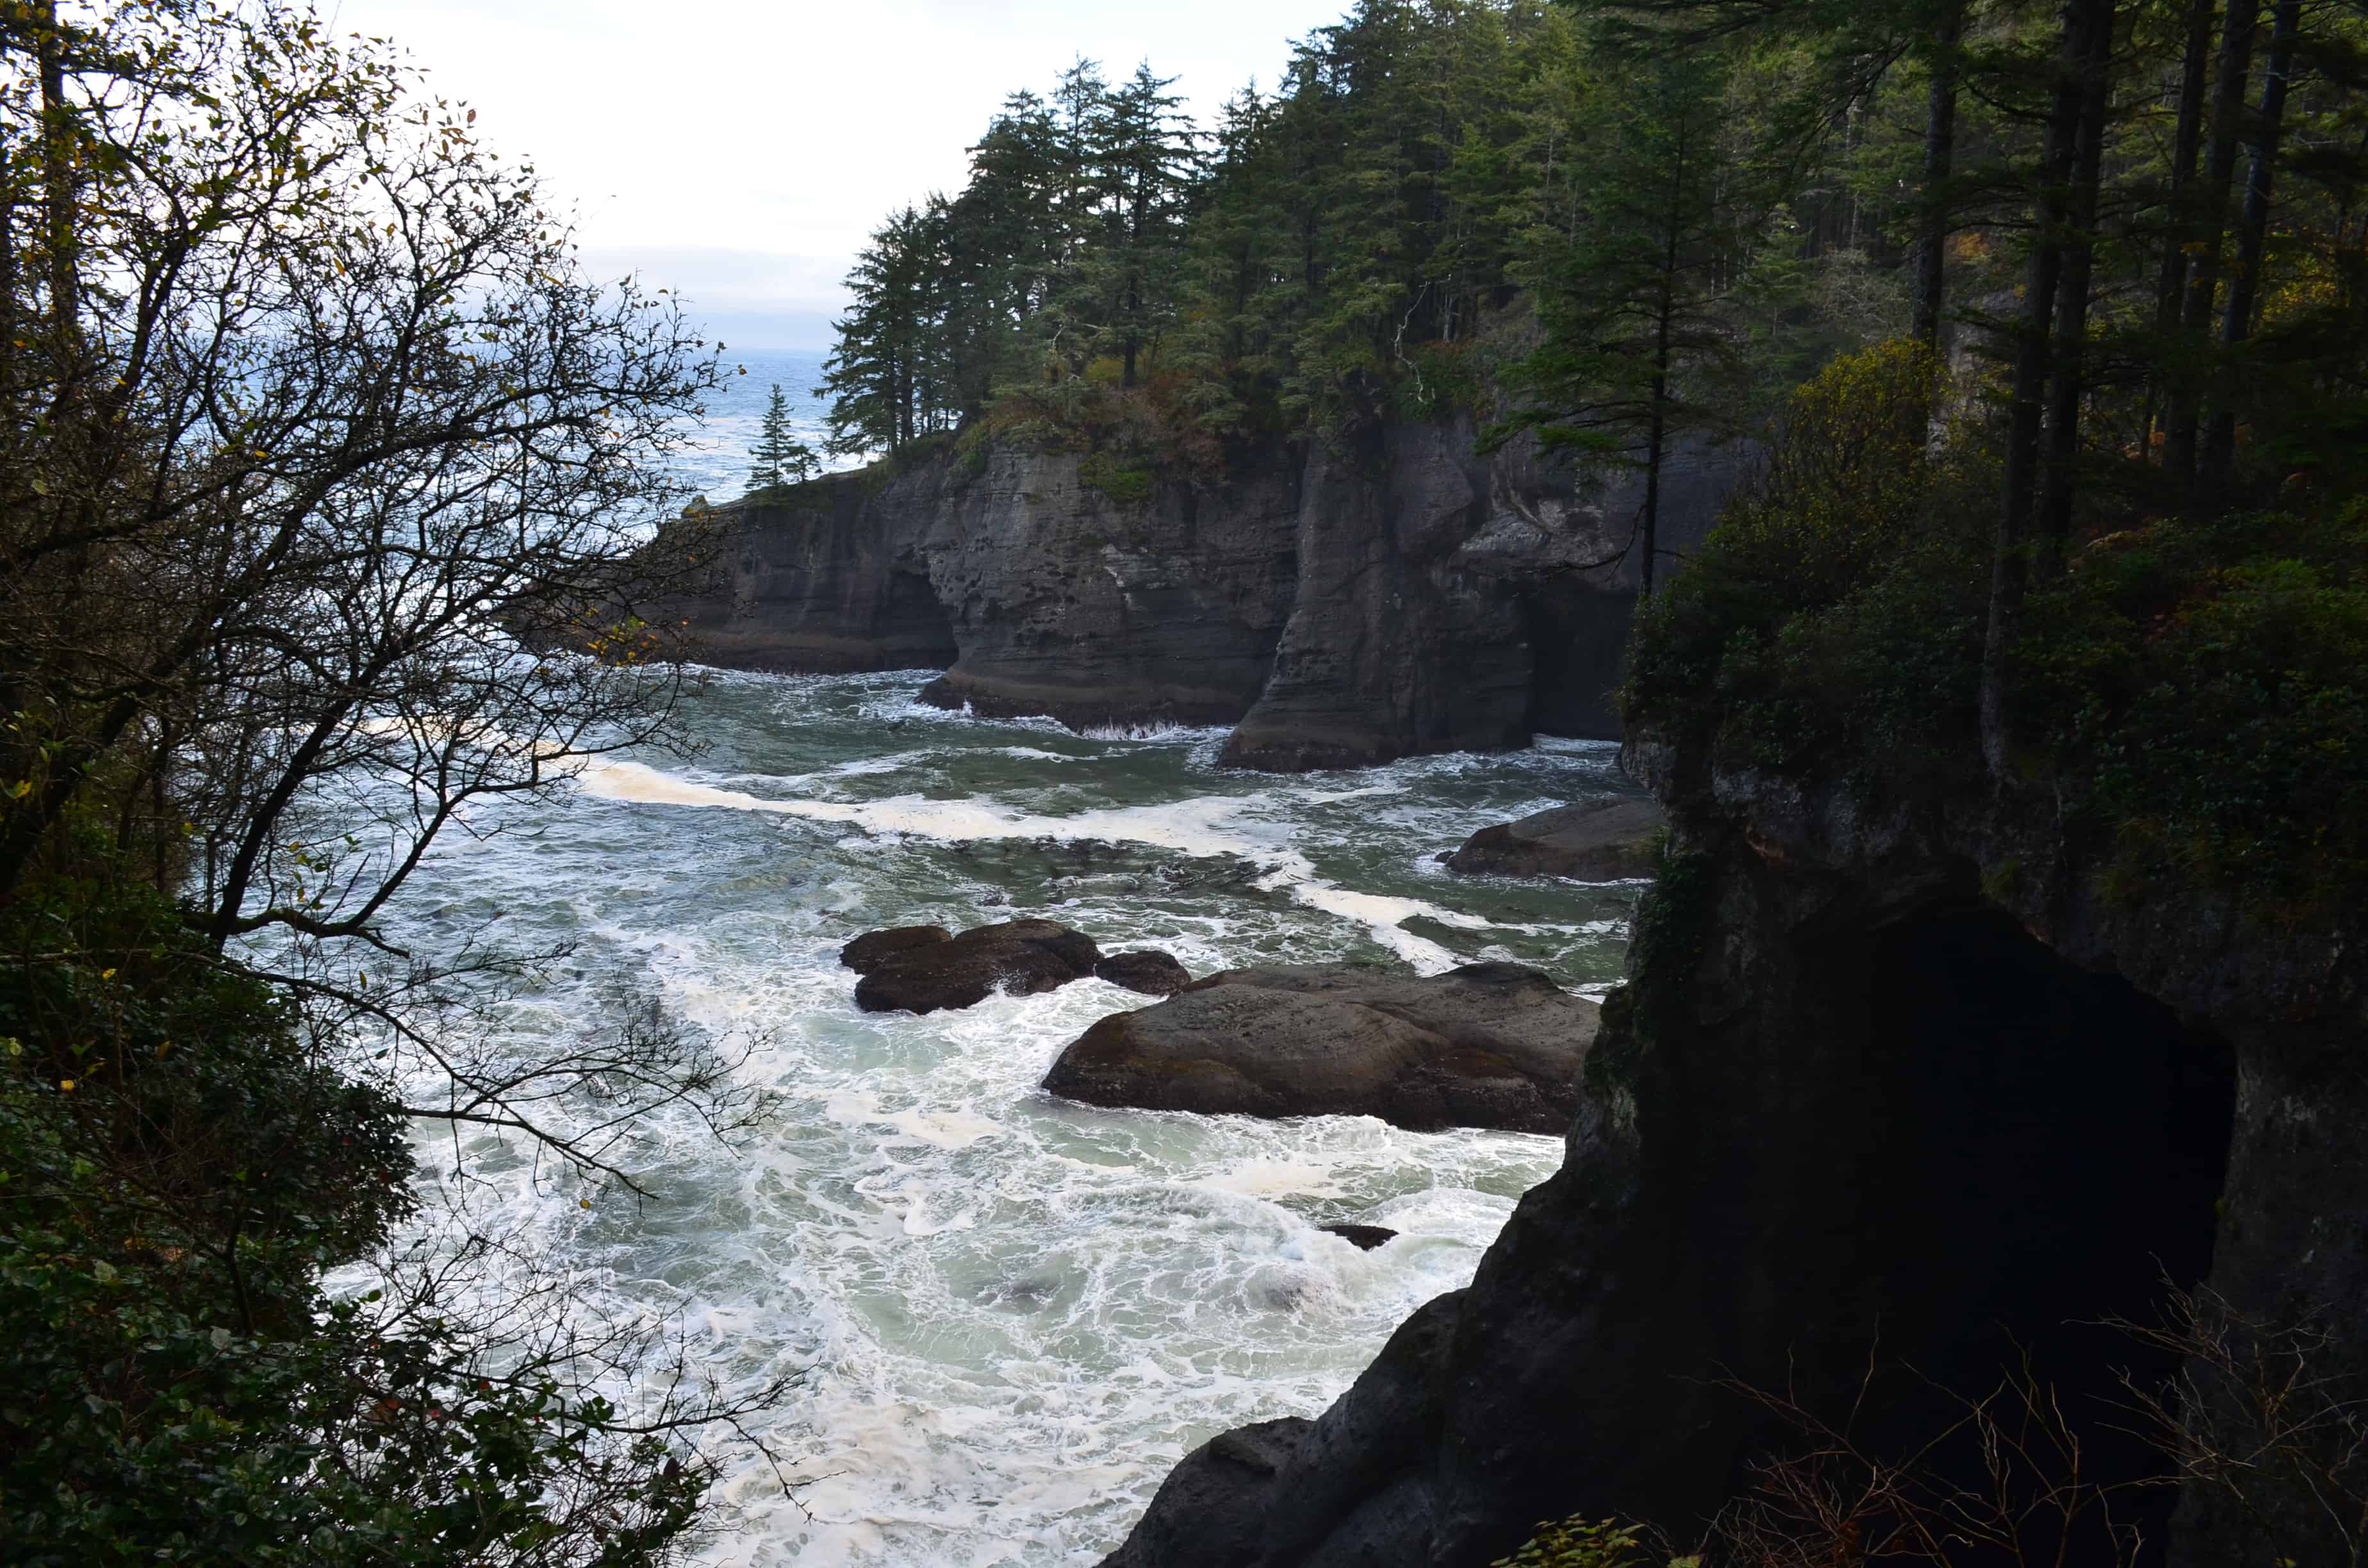 Second viewpoint on the Cape Flattery Trail on the Makah Reservation in Washington